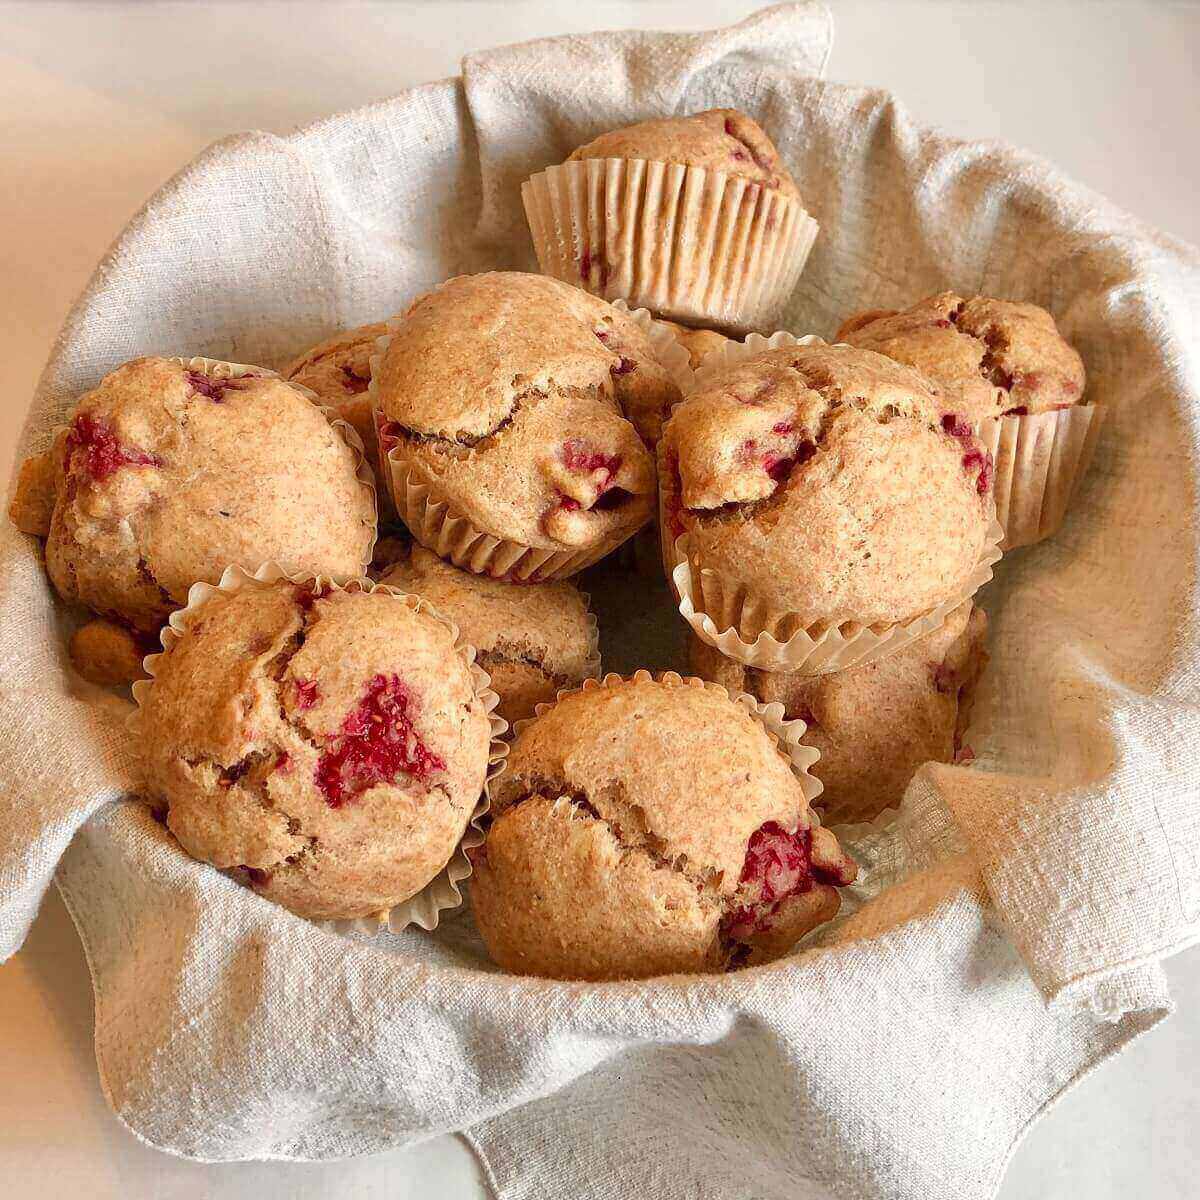 Raspberry muffins piled in a basket.